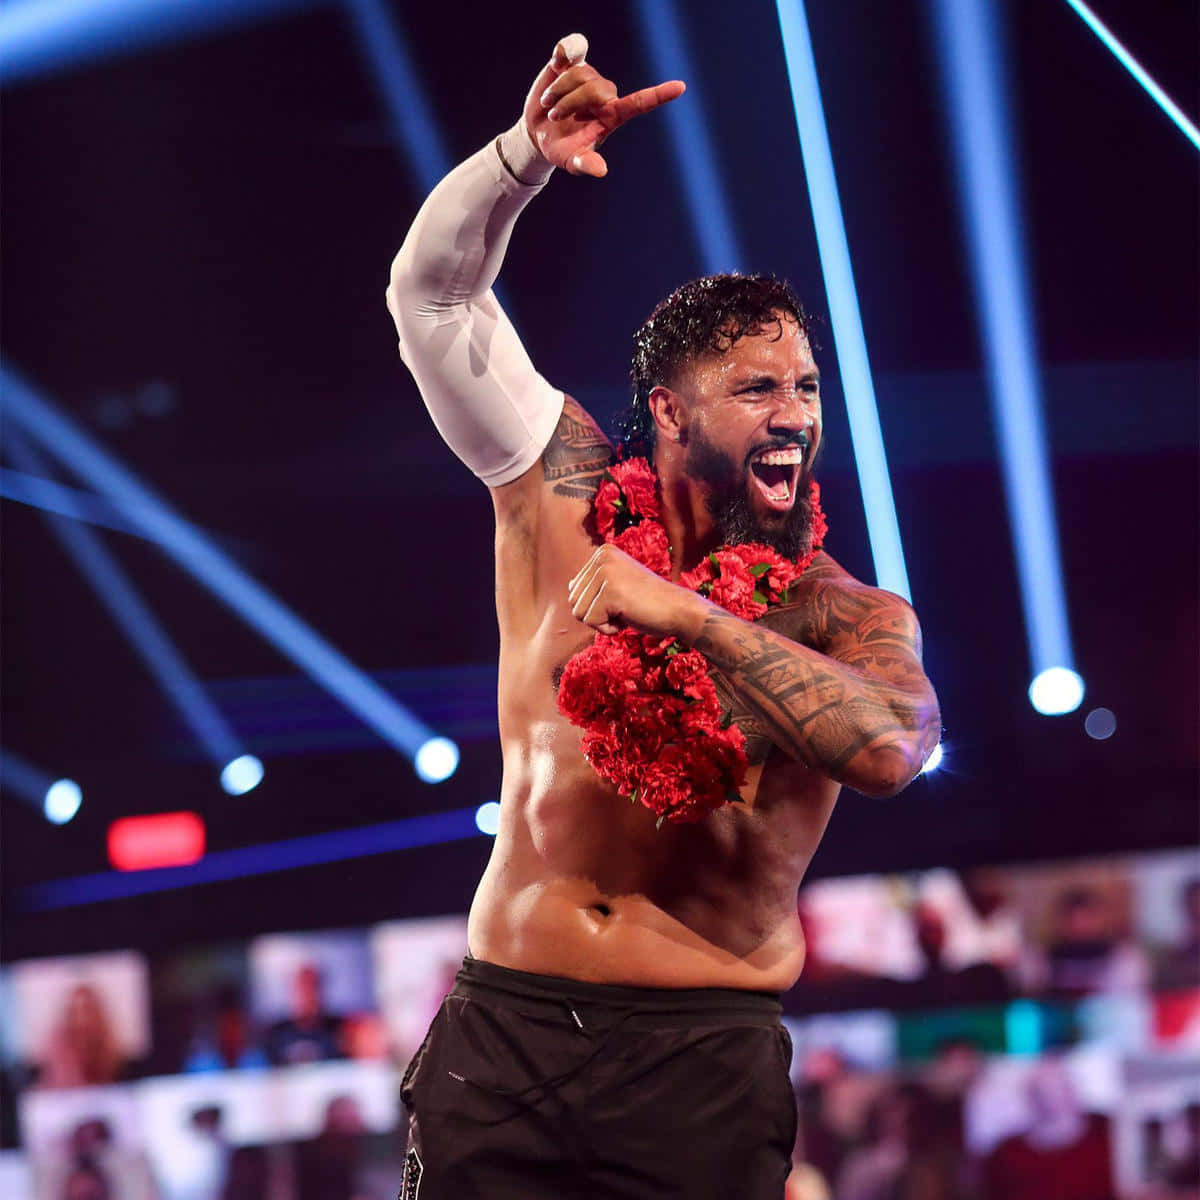 WWE Star Jey Uso With Flowers Wallpaper